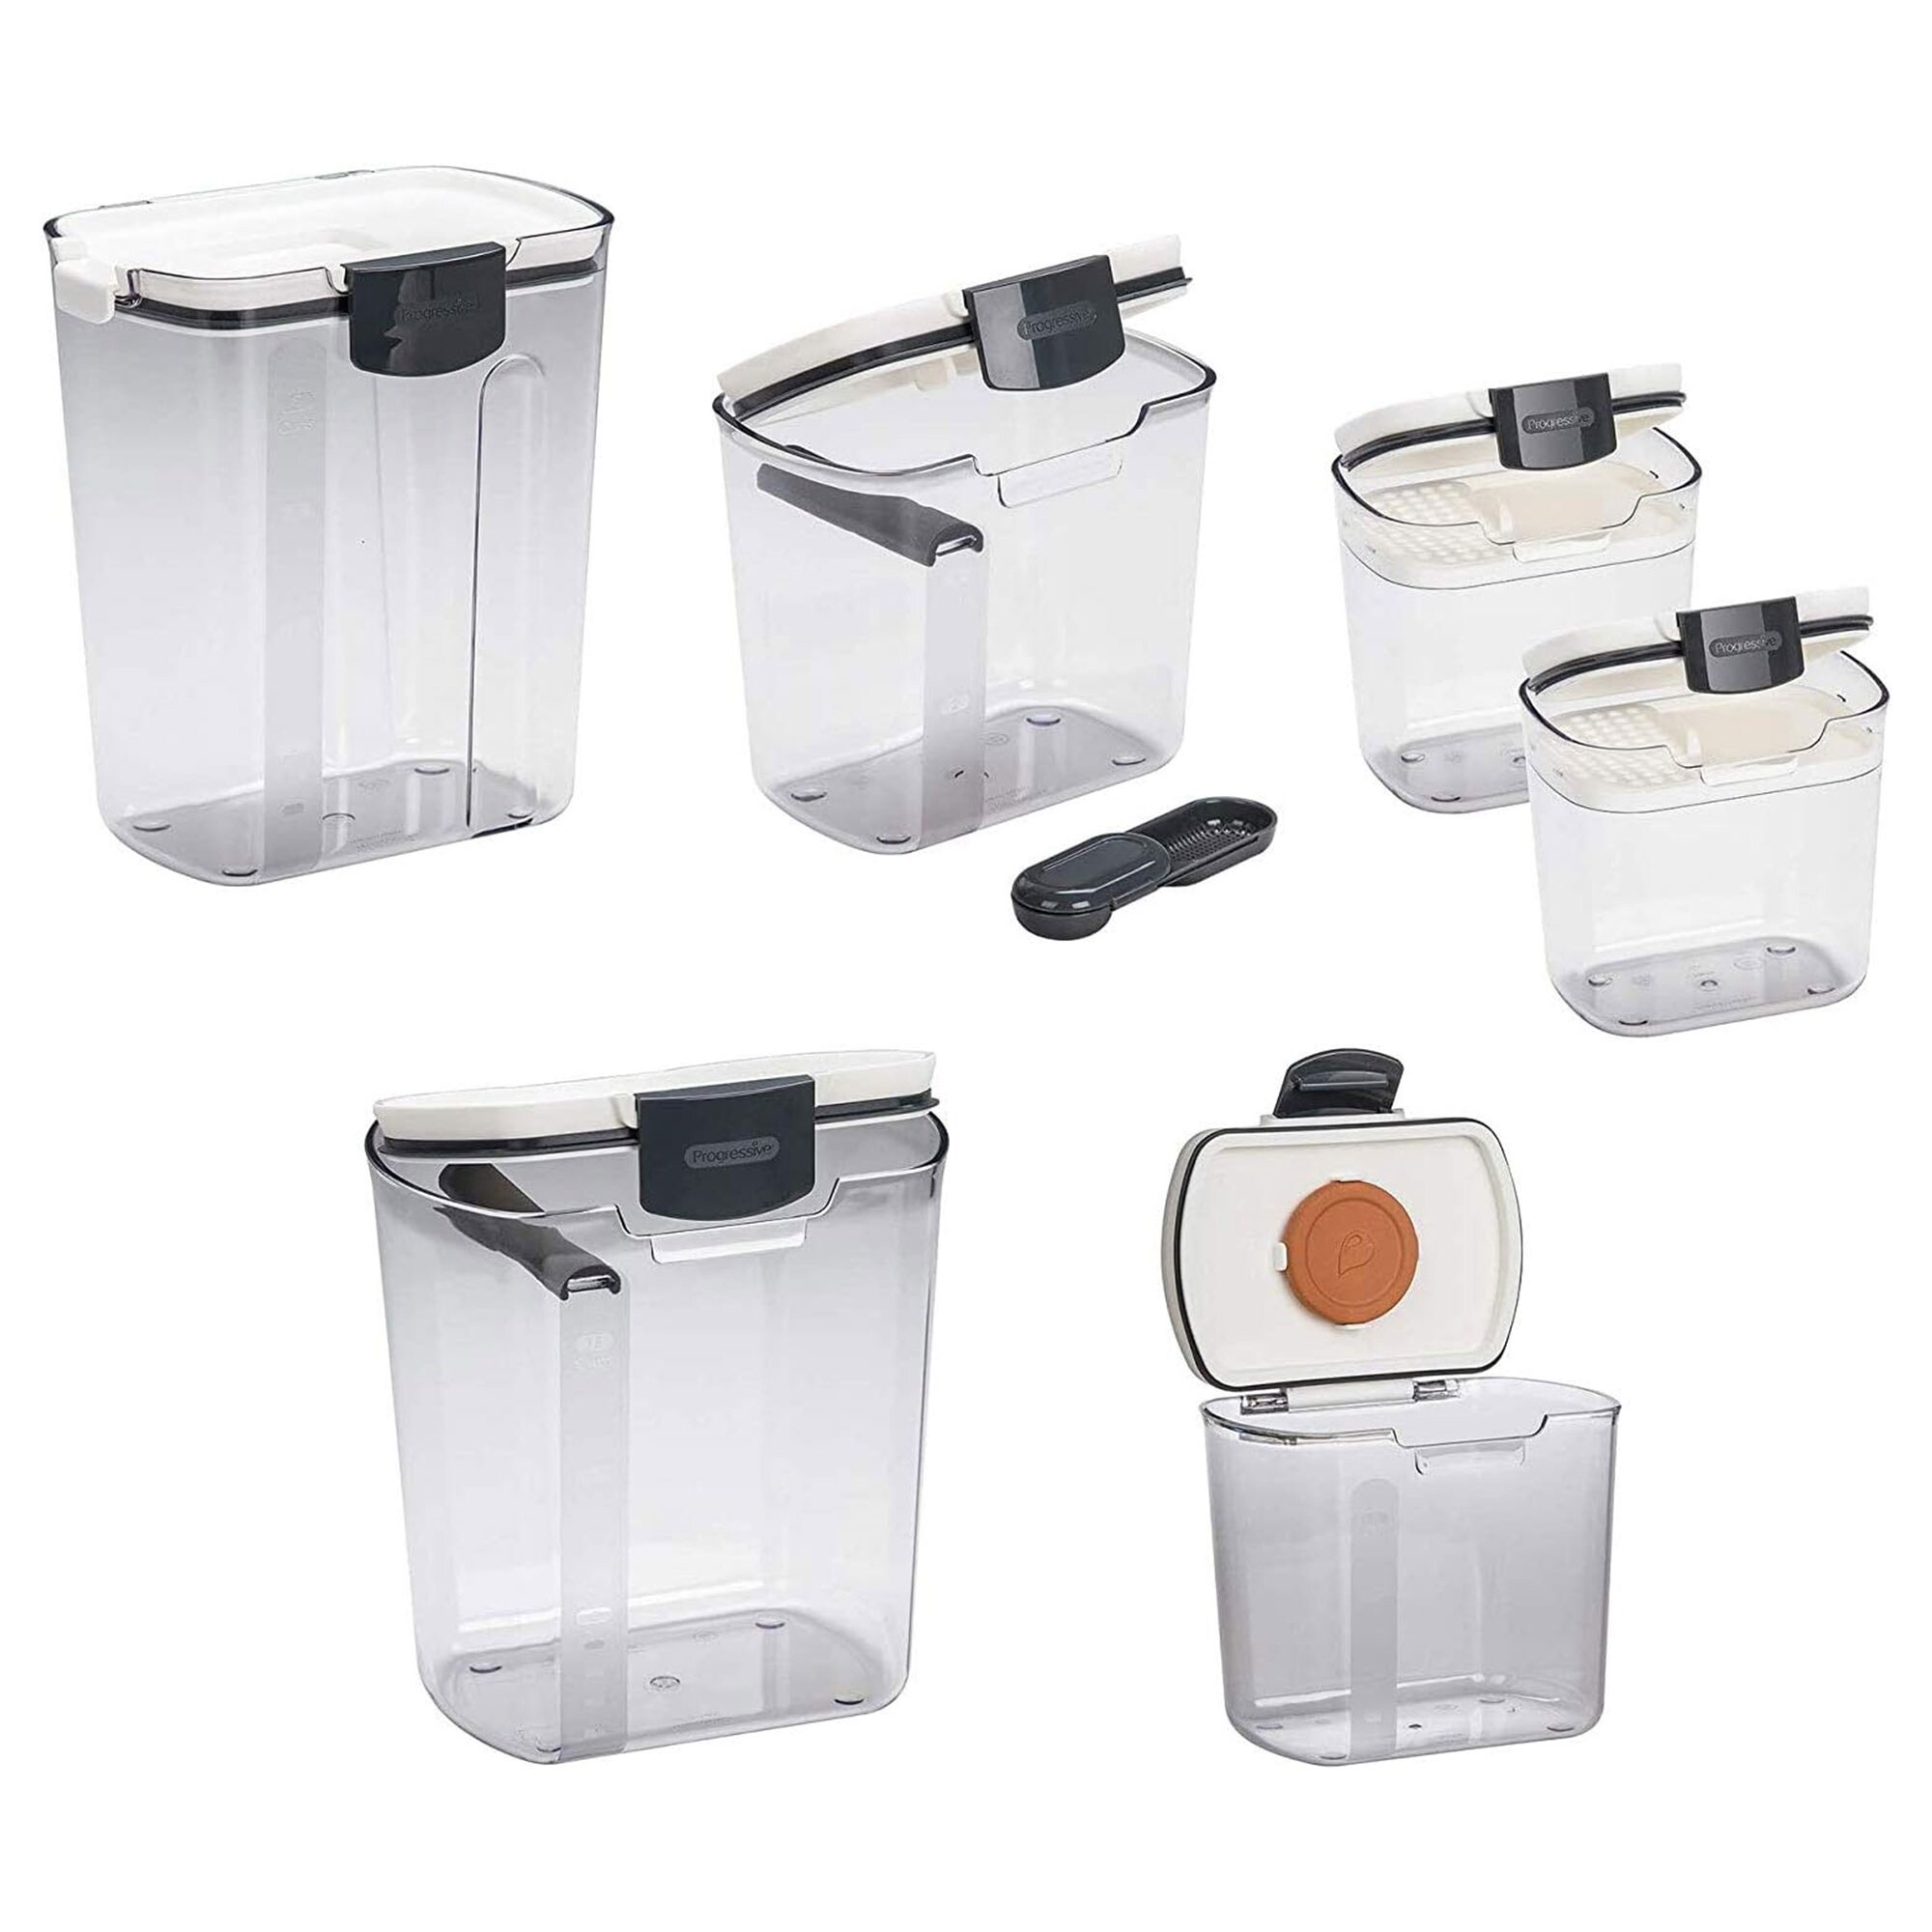 https://ak1.ostkcdn.com/images/products/is/images/direct/5f6539481f1e284da4f1977ecad9828502756fe9/Progressive-International-8-Piece-Set-with-Coffee-Container-%26-Grain-Container.jpg